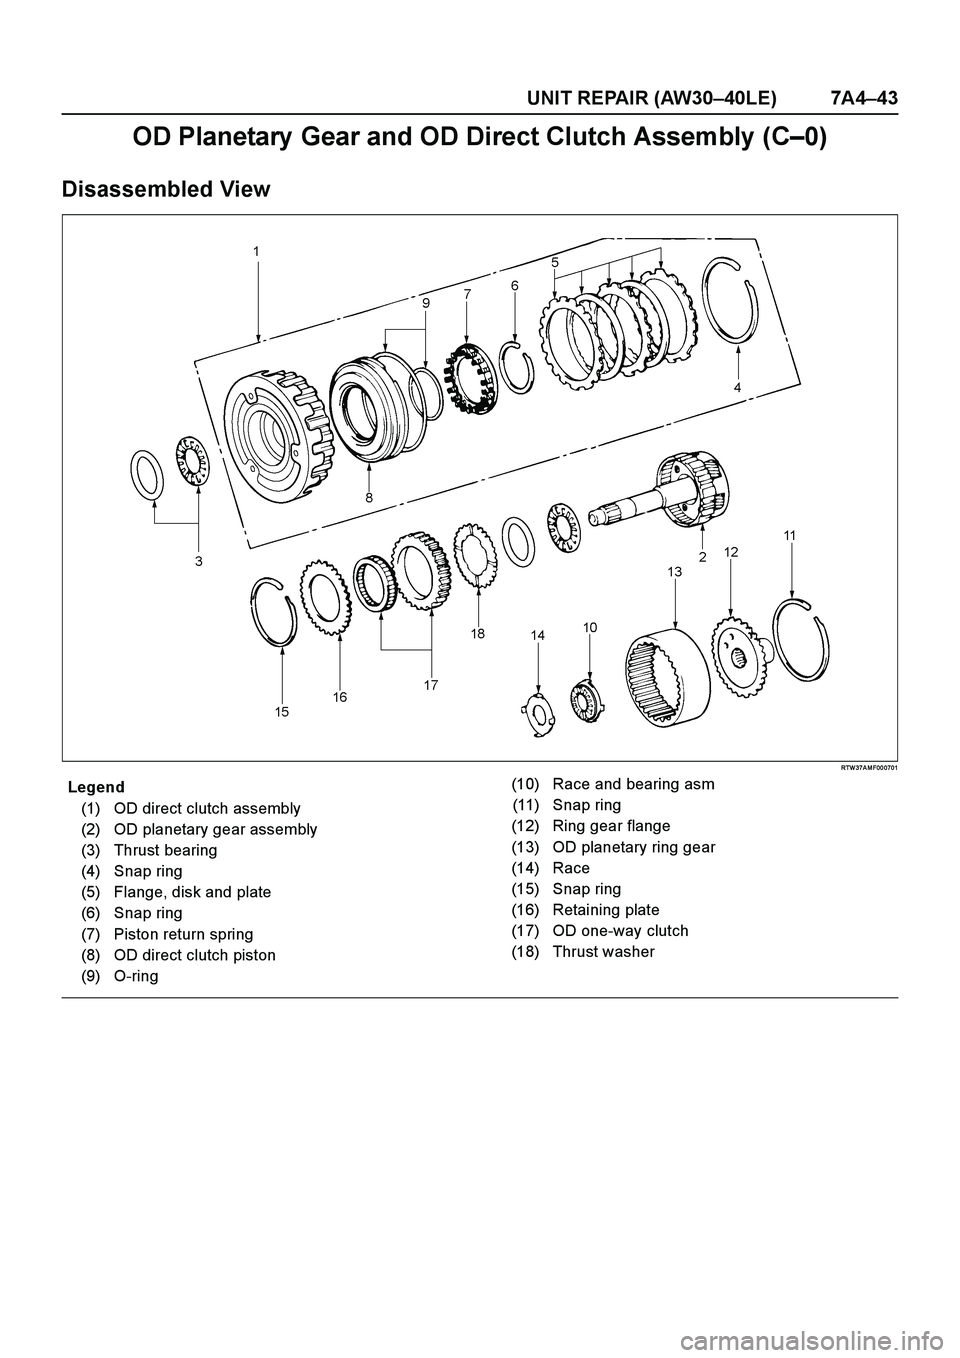 ISUZU TF SERIES 2004  Workshop Manual UNIT REPAIR (AW30–40LE) 7A4–43
OD Planetary  Gear and OD Direct Clutch Assembly (C–0)
Disassembled View
RTW 37A M F00 0701
E nd O FCallo ut
Legend
(1) OD direct clutch assembly
(2) OD planetary 